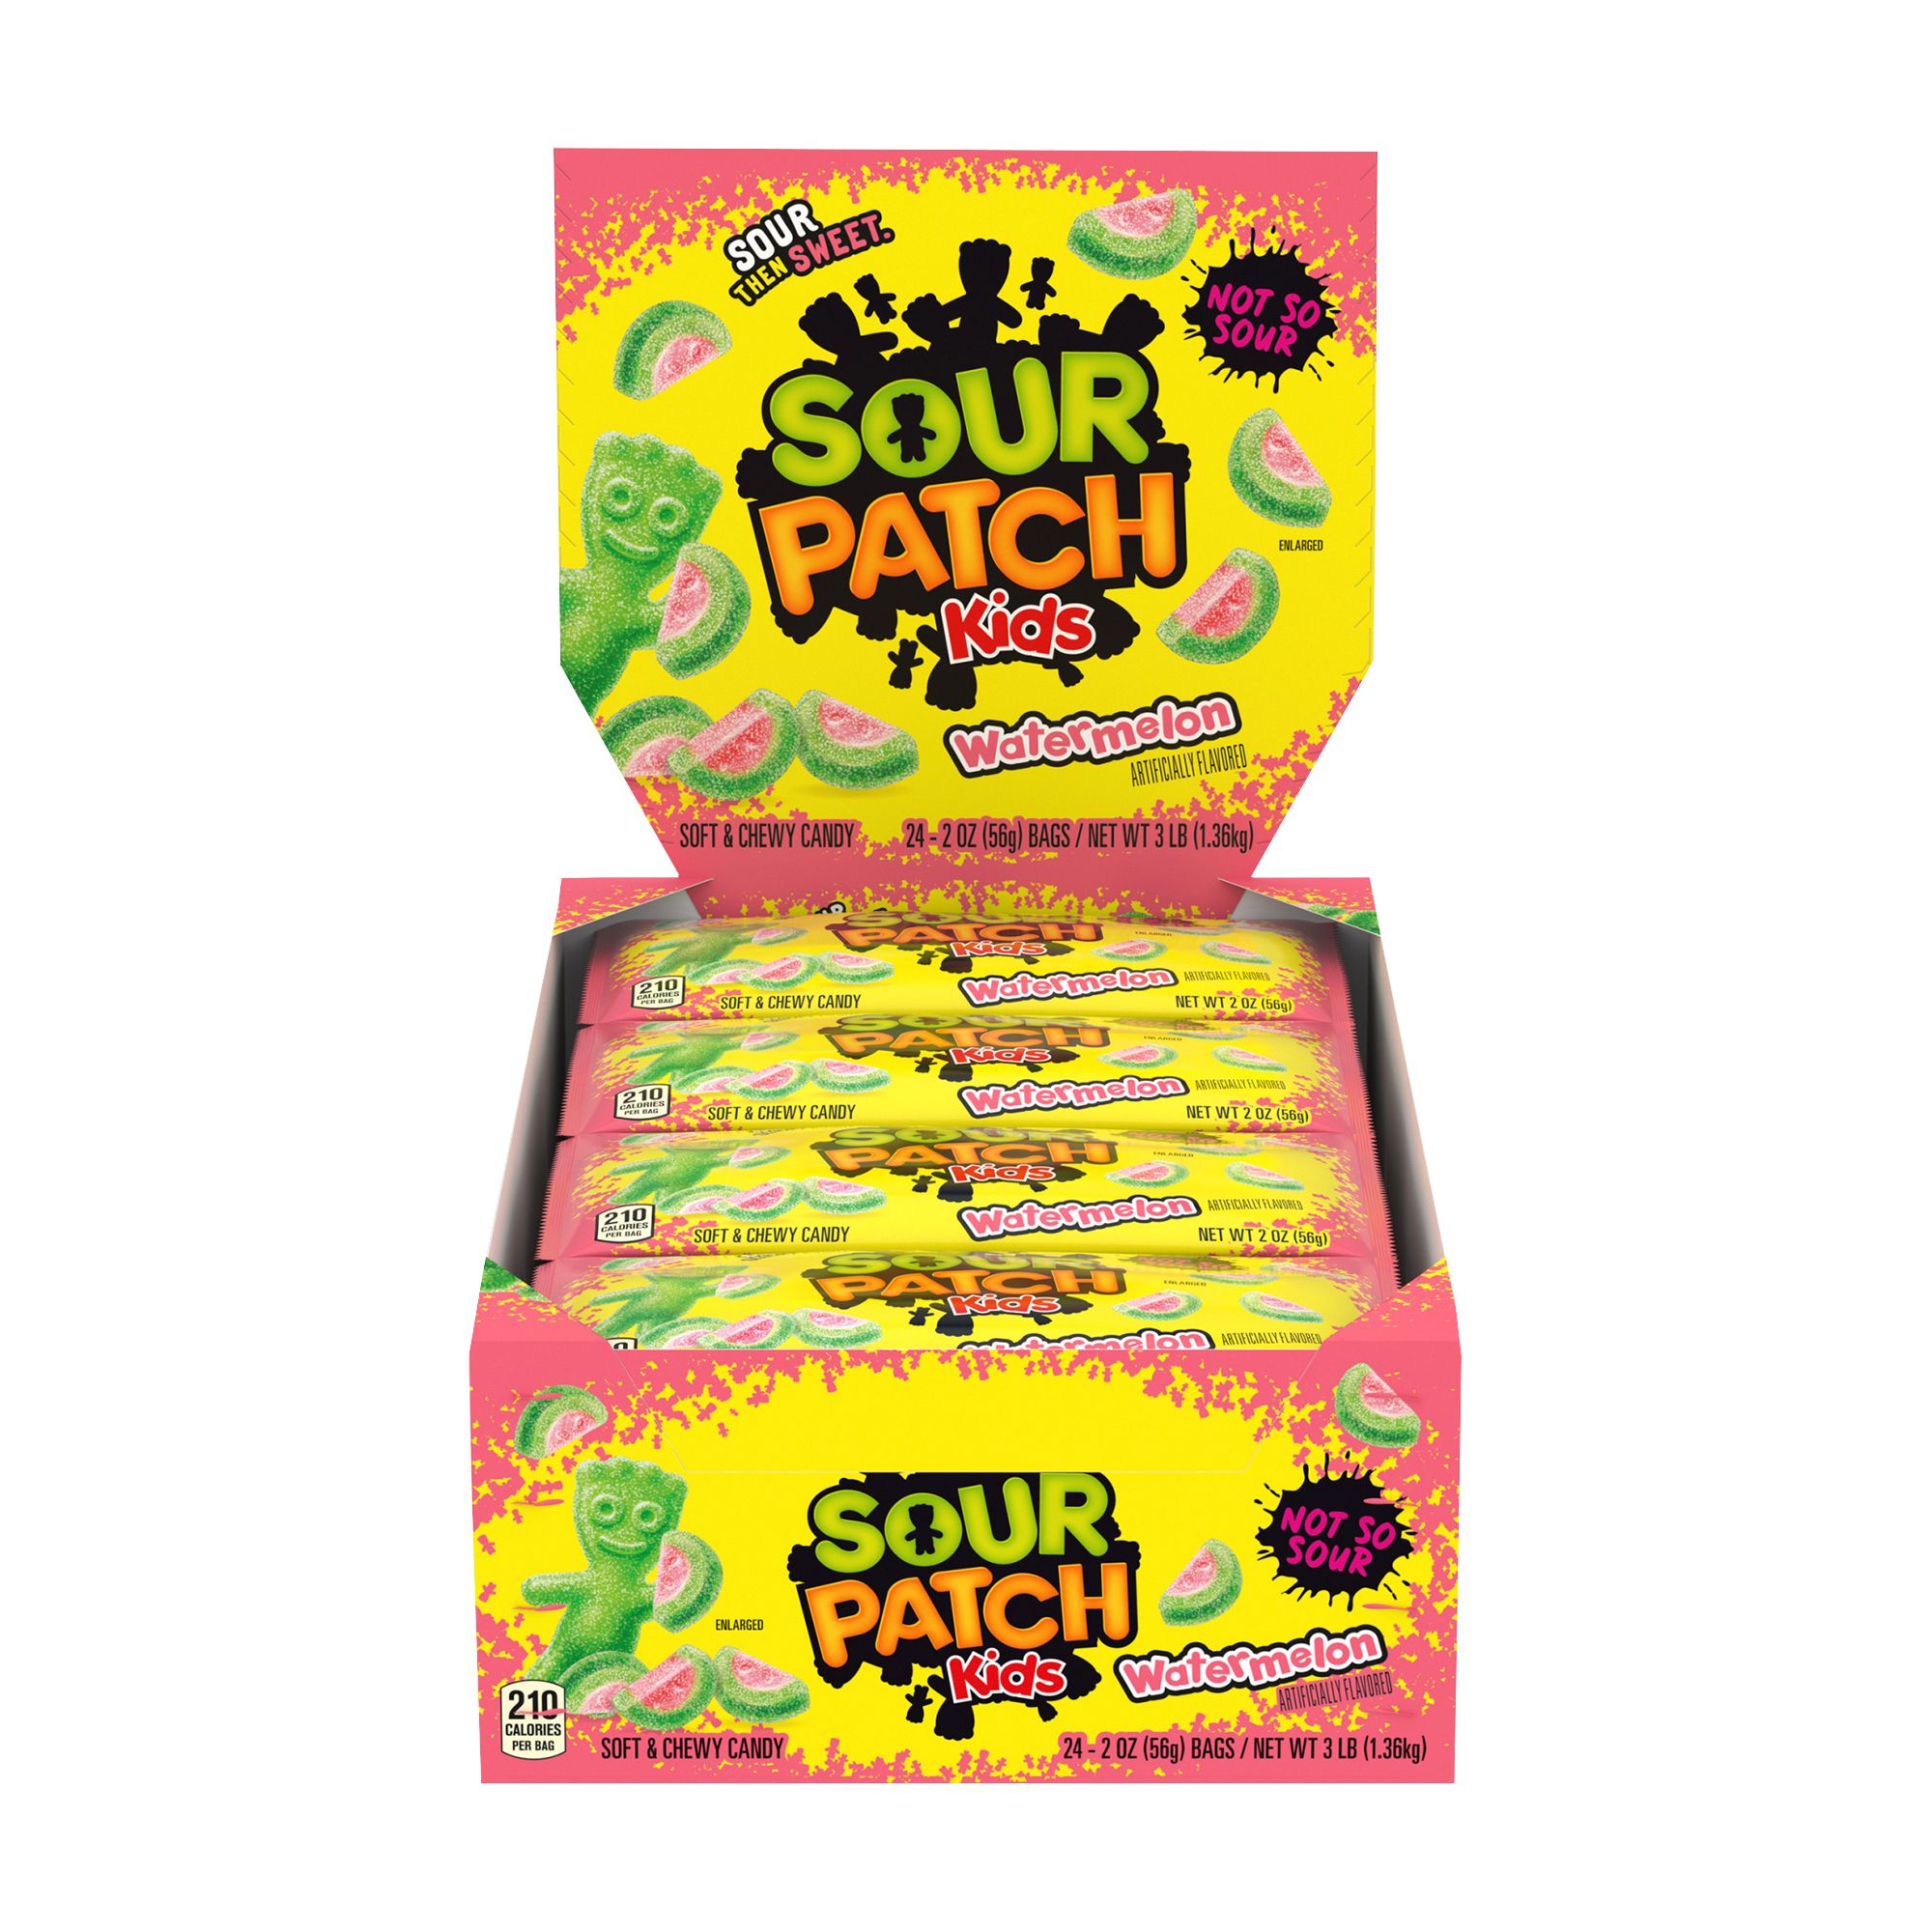 Sour Patch Kids and Swedish Fish Mini and Chewy Candy Packs, 200